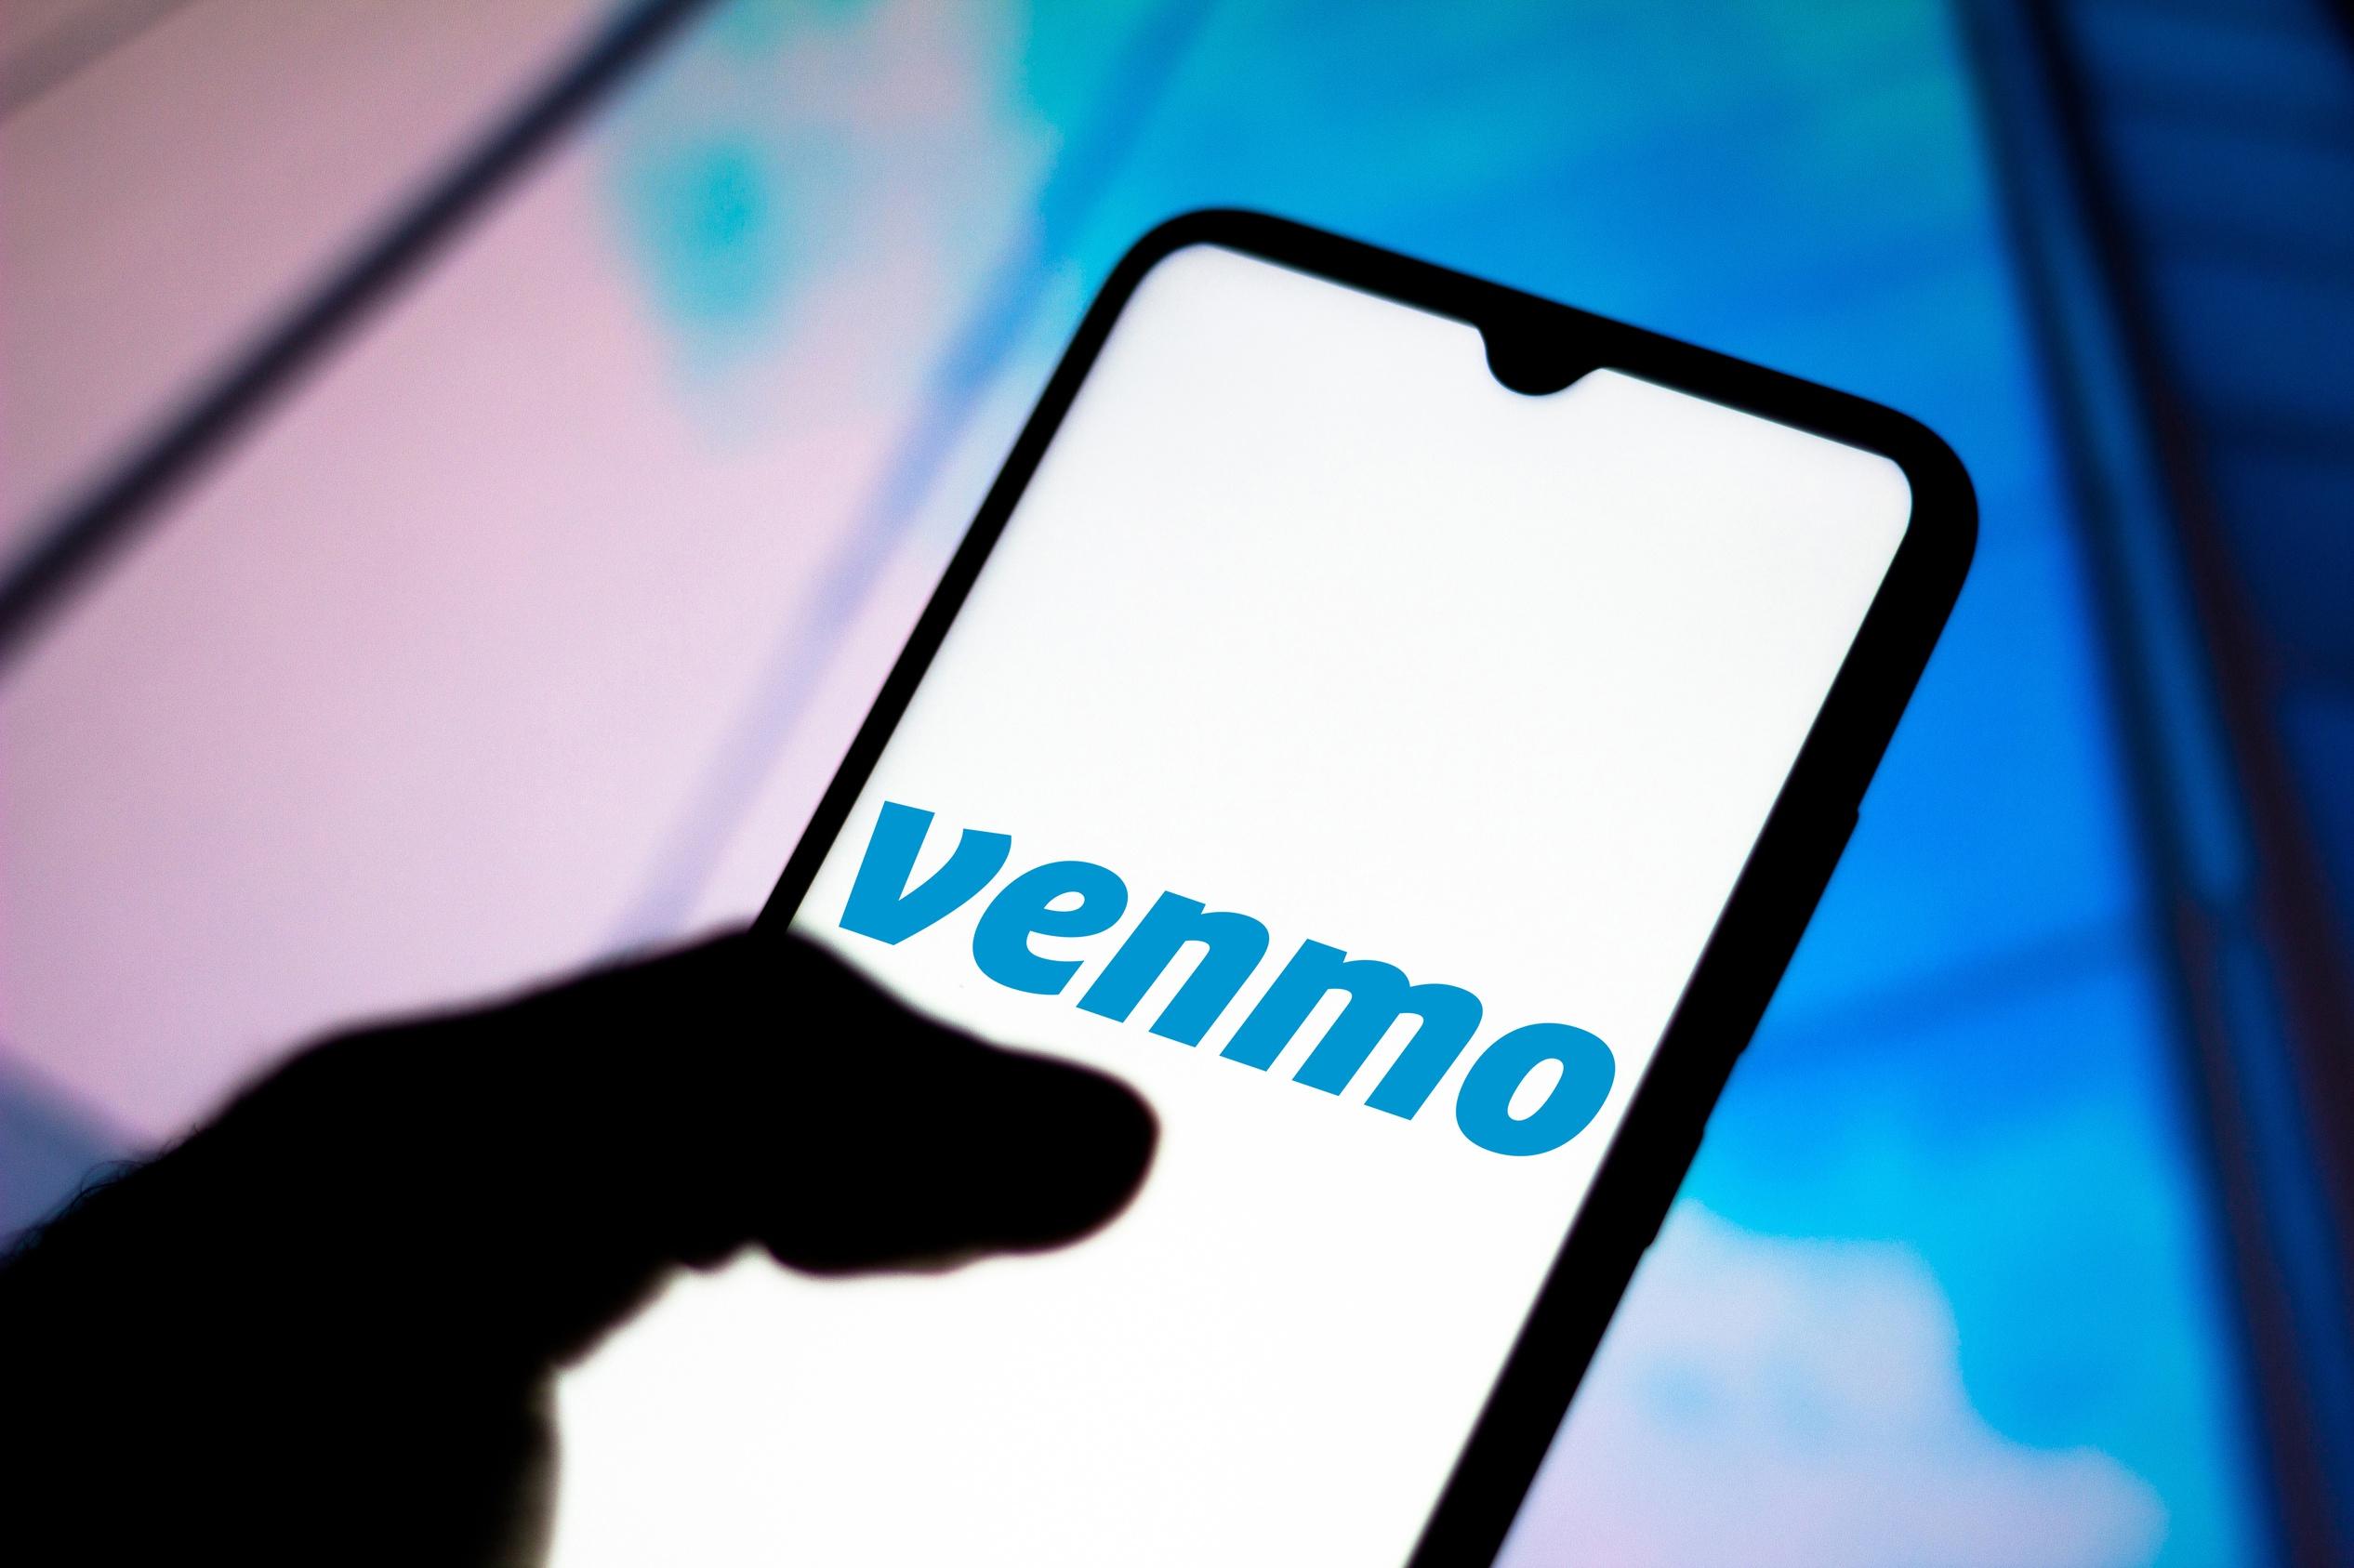 New Venmo feature lets users transfer crypto | Fortune Crypto